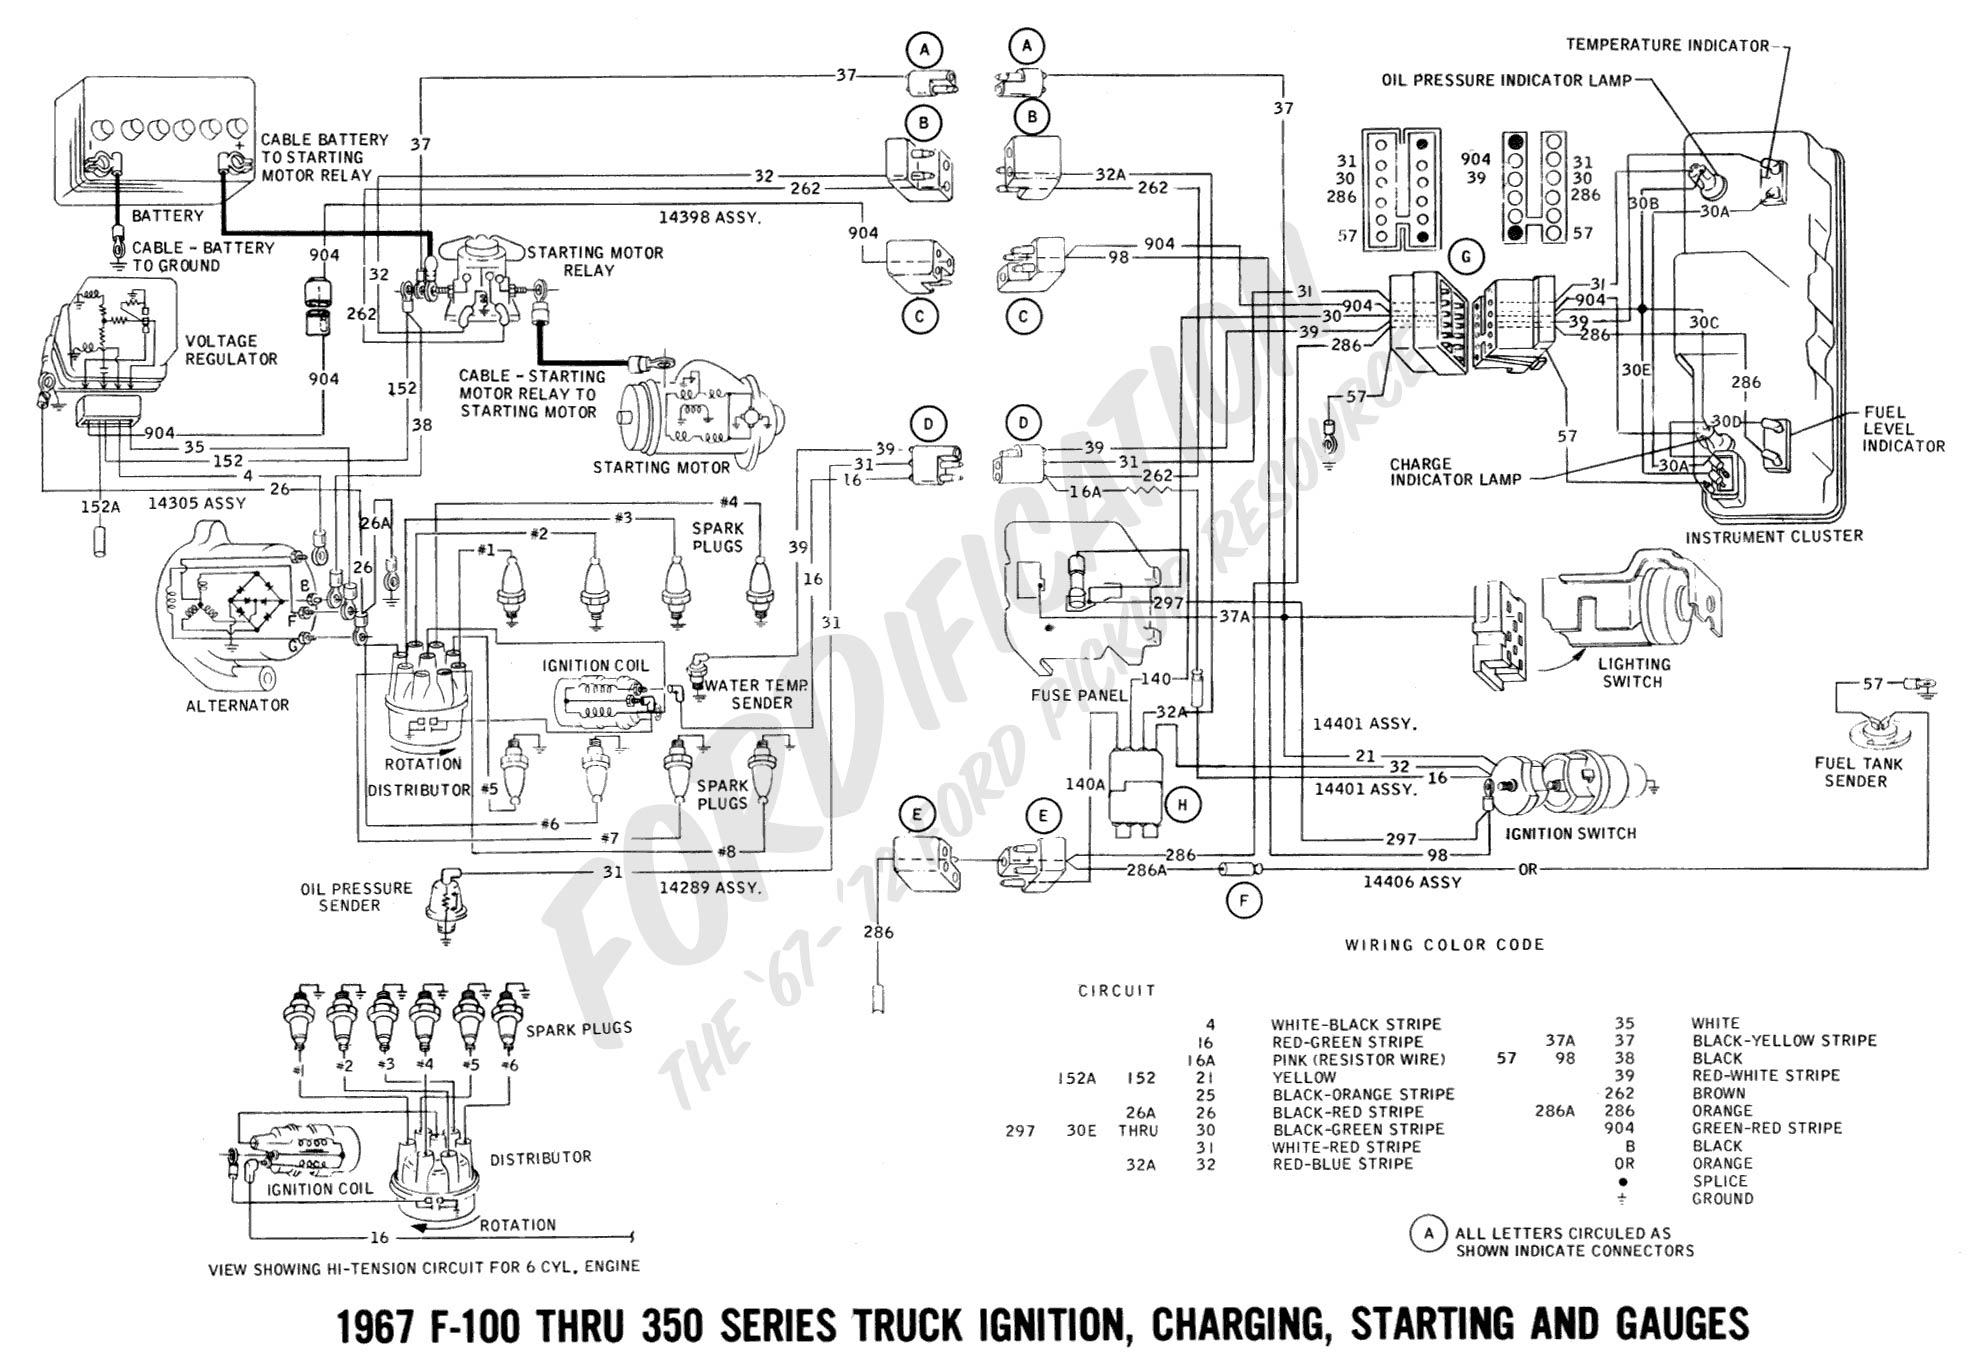 Ford Ignition Switch Wiring Diagram from www.fordification.com